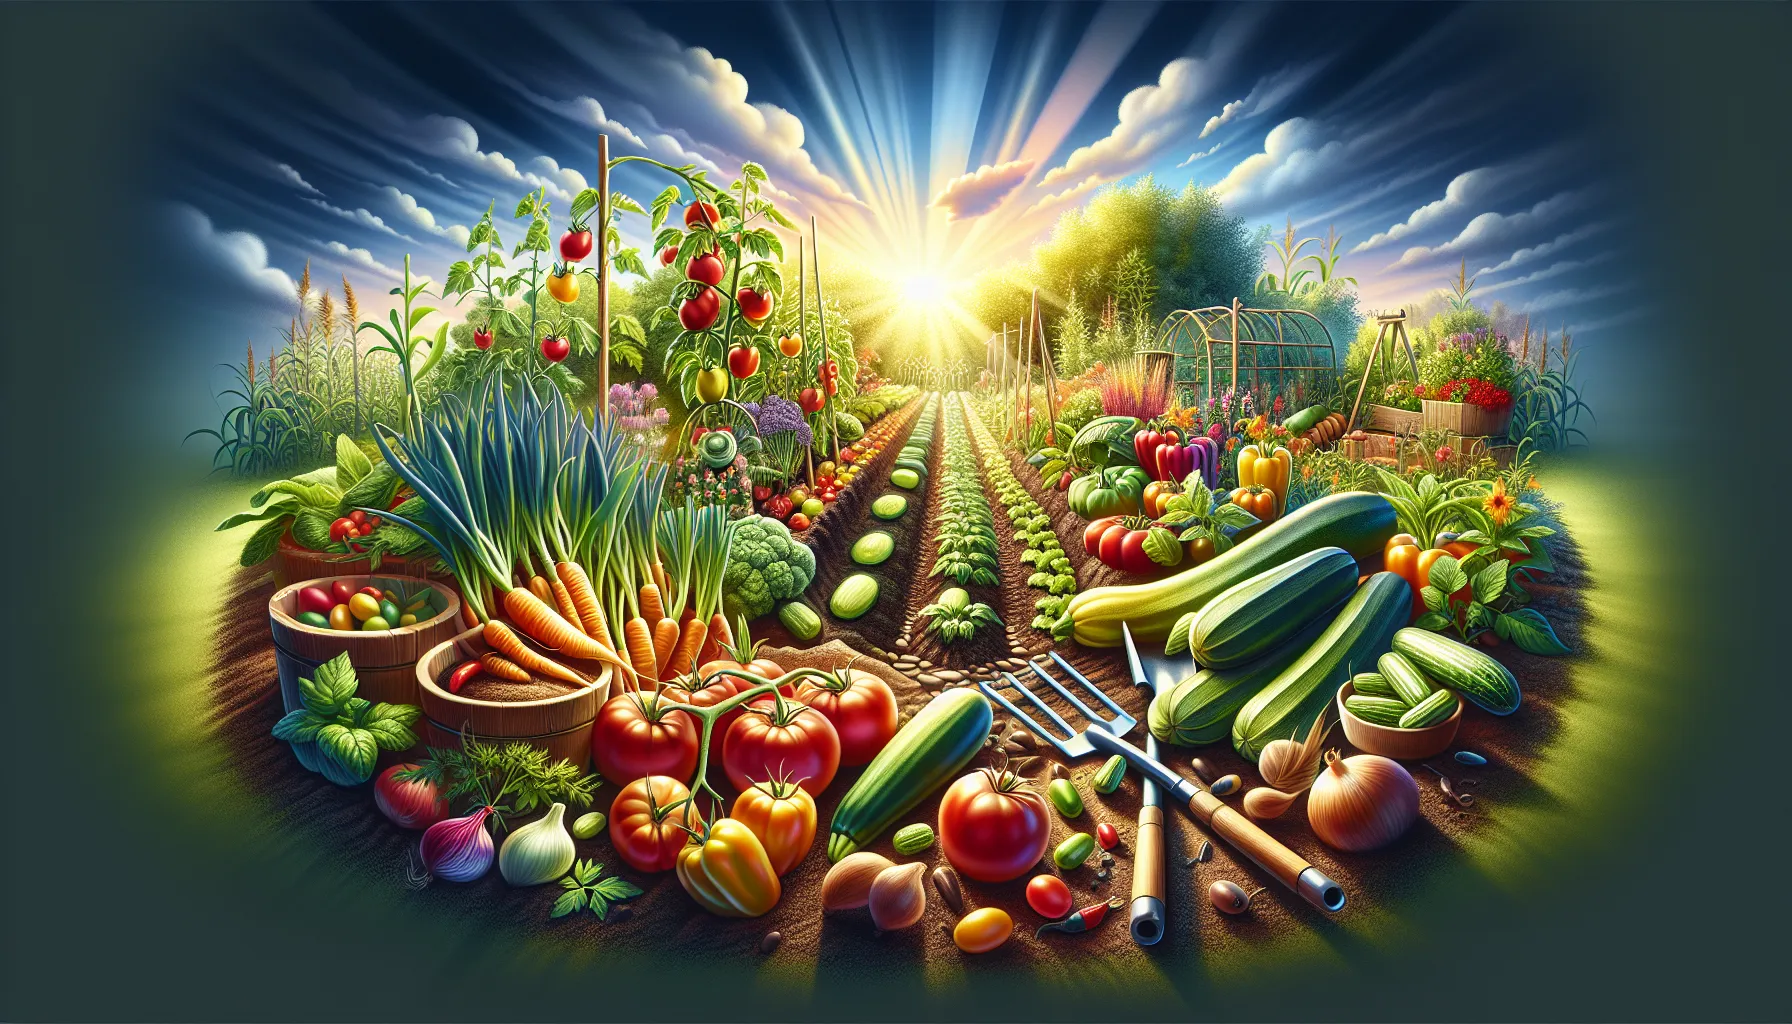 A vibrant illustration of a variety of colorful garden vegetables thriving in a sunlit, well-tended garden.